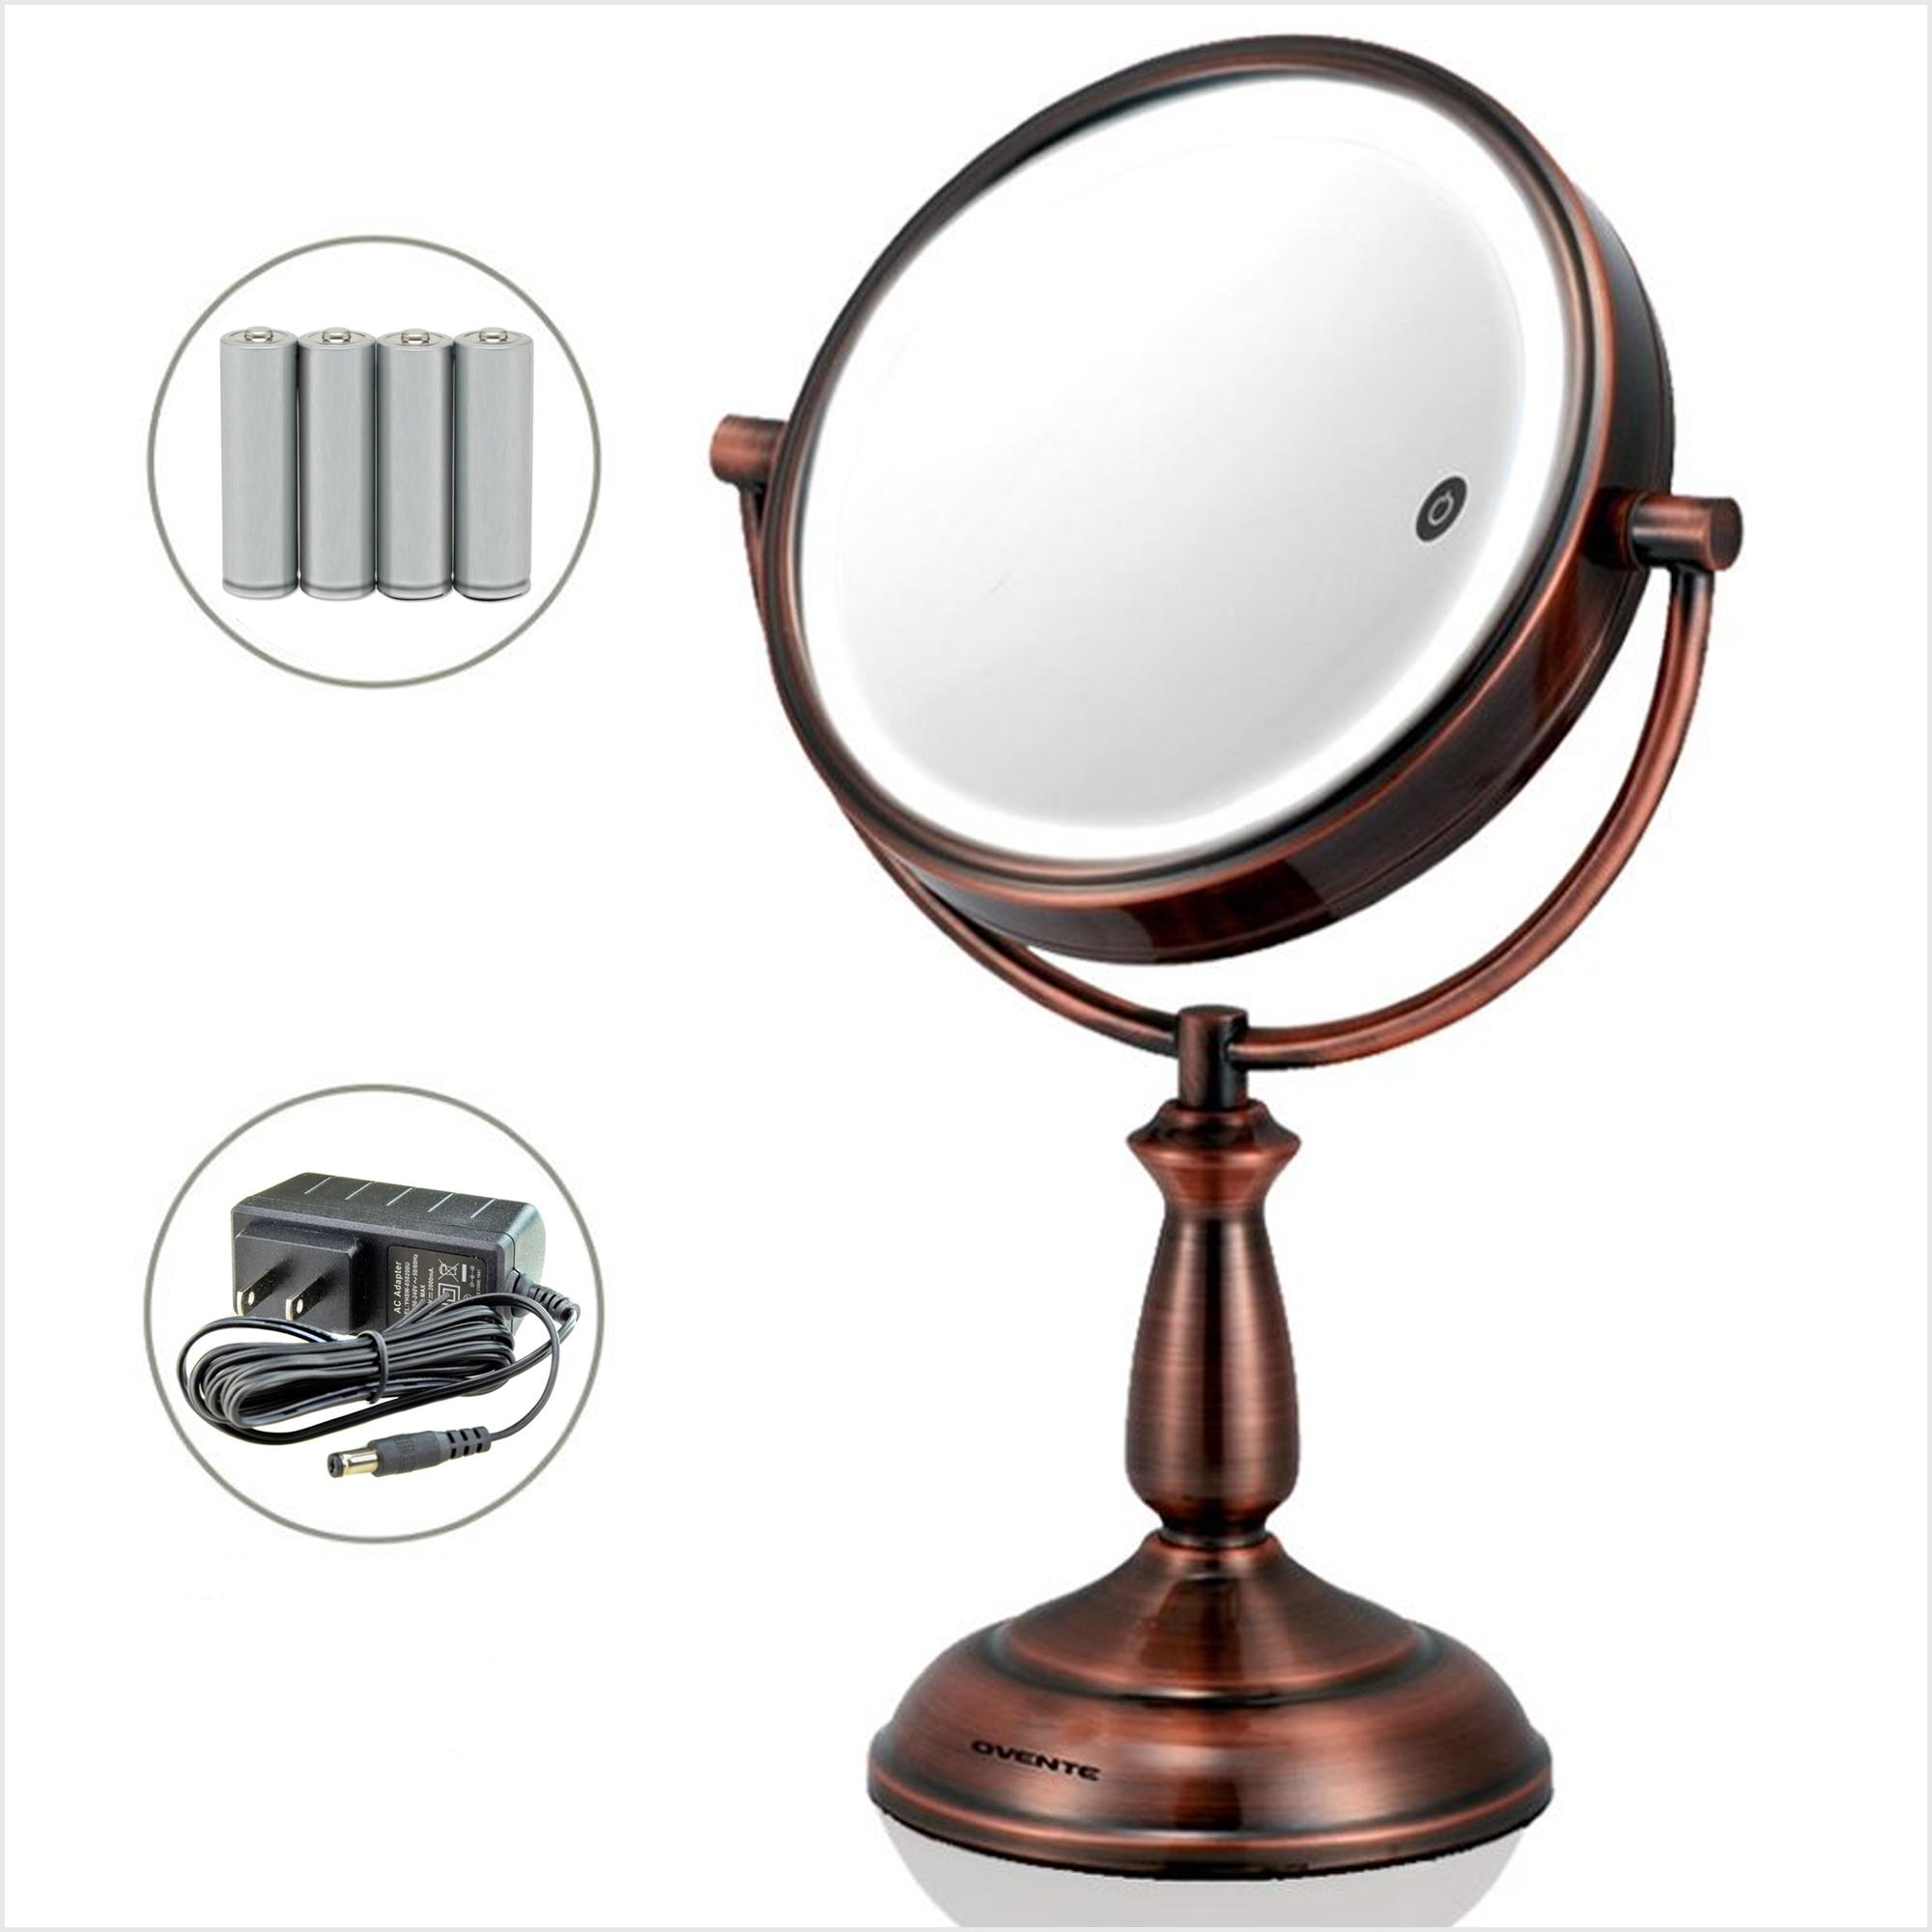 Ovente 7.5" Lighted Tabletop Vanity Makeup Mirror, Magnifier Spinning Double Sided, MPT75CO1X10X - image 1 of 10